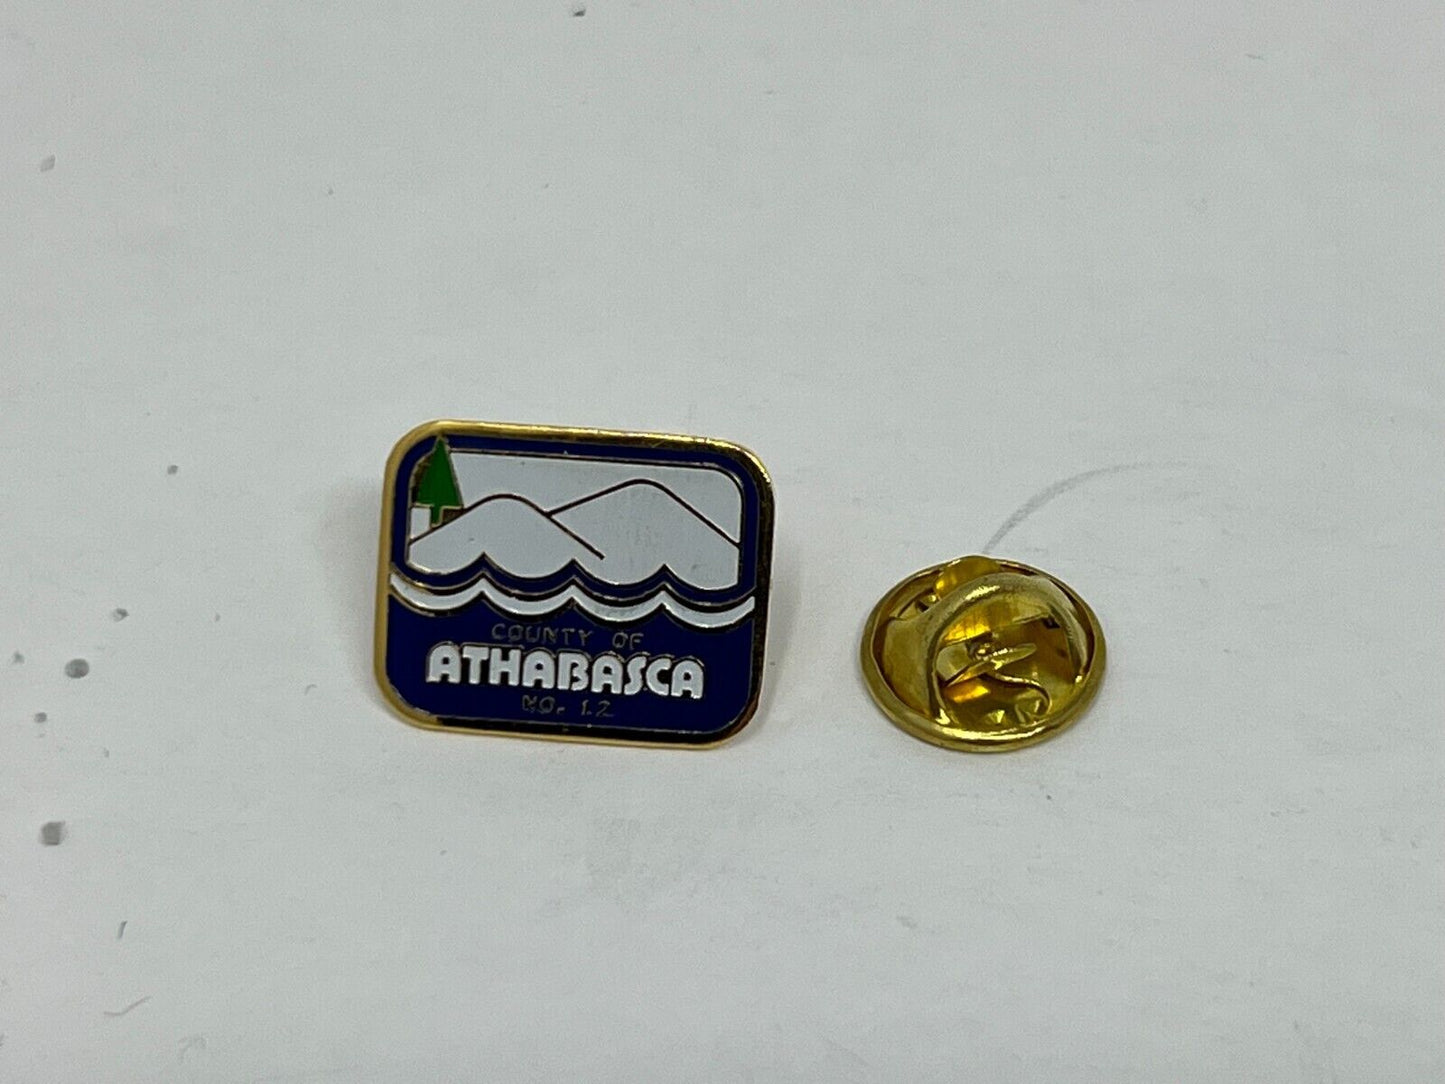 County of Athabasca No. 12 Cities & States Lapel Pin P2